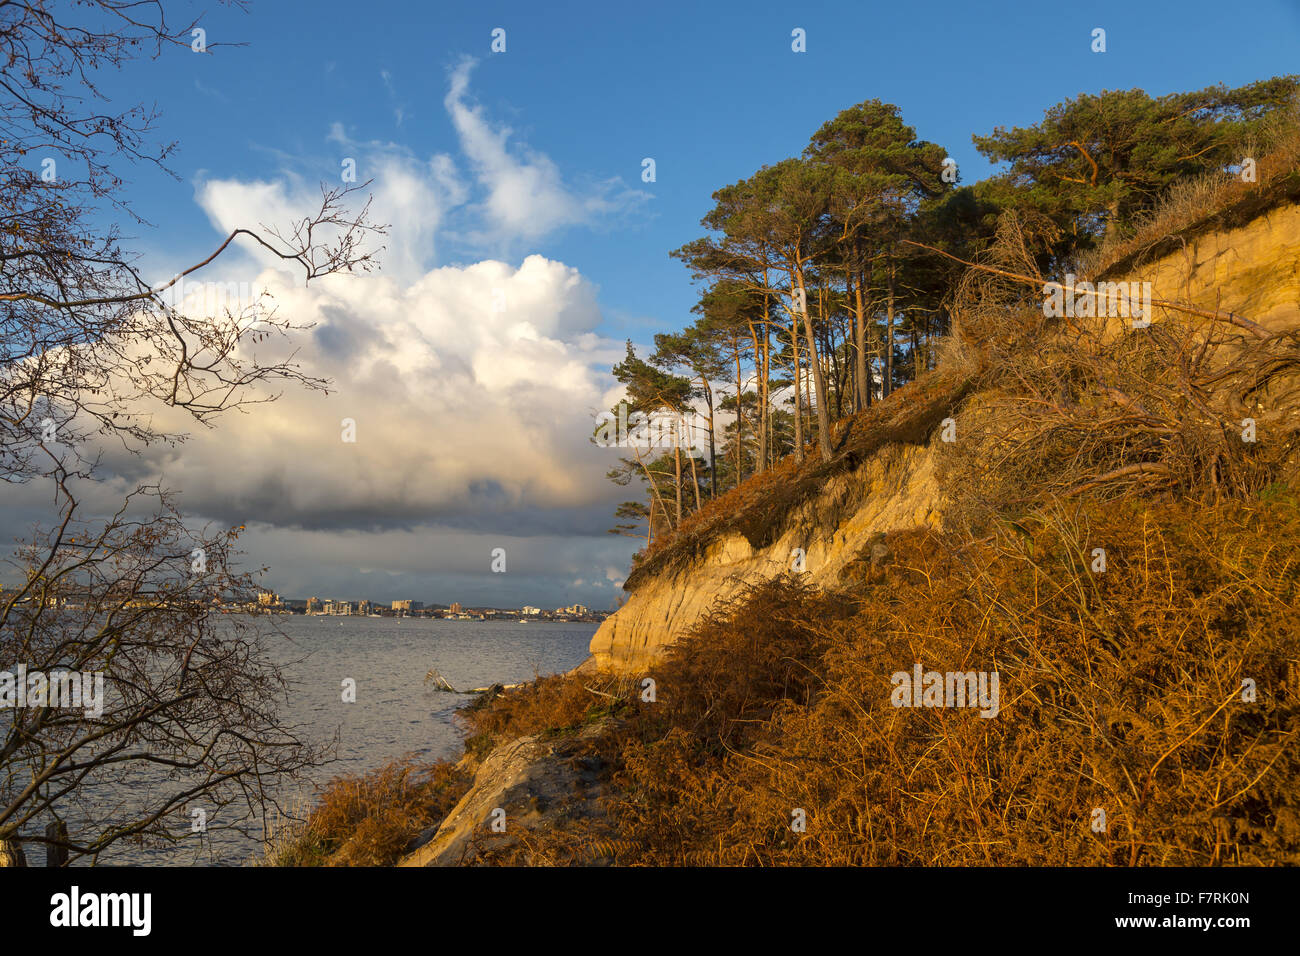 Near Pottery Pier on Brownsea Island, Dorset. This island wildlife sanctuary is a haven for wildlife such as red squirrels and a huge variety of birds. Stock Photo